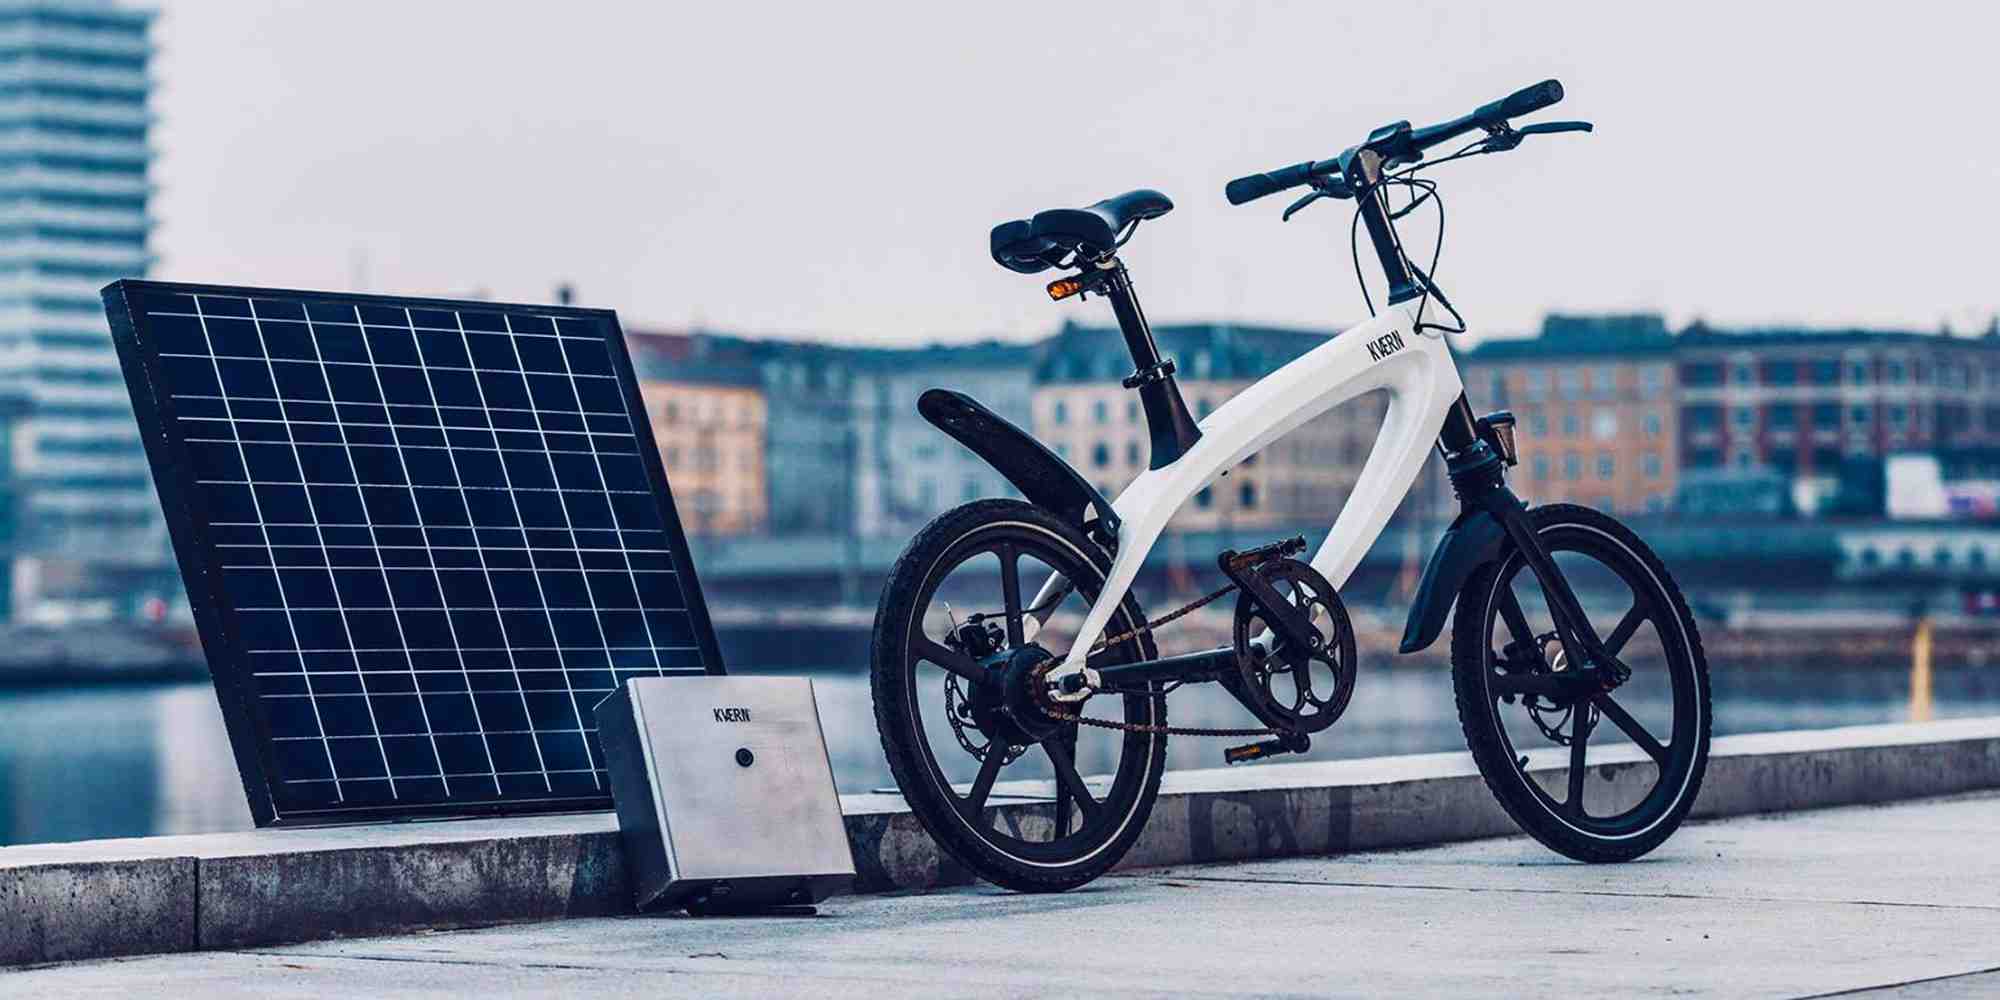 Can I drive an electric bike without a license?